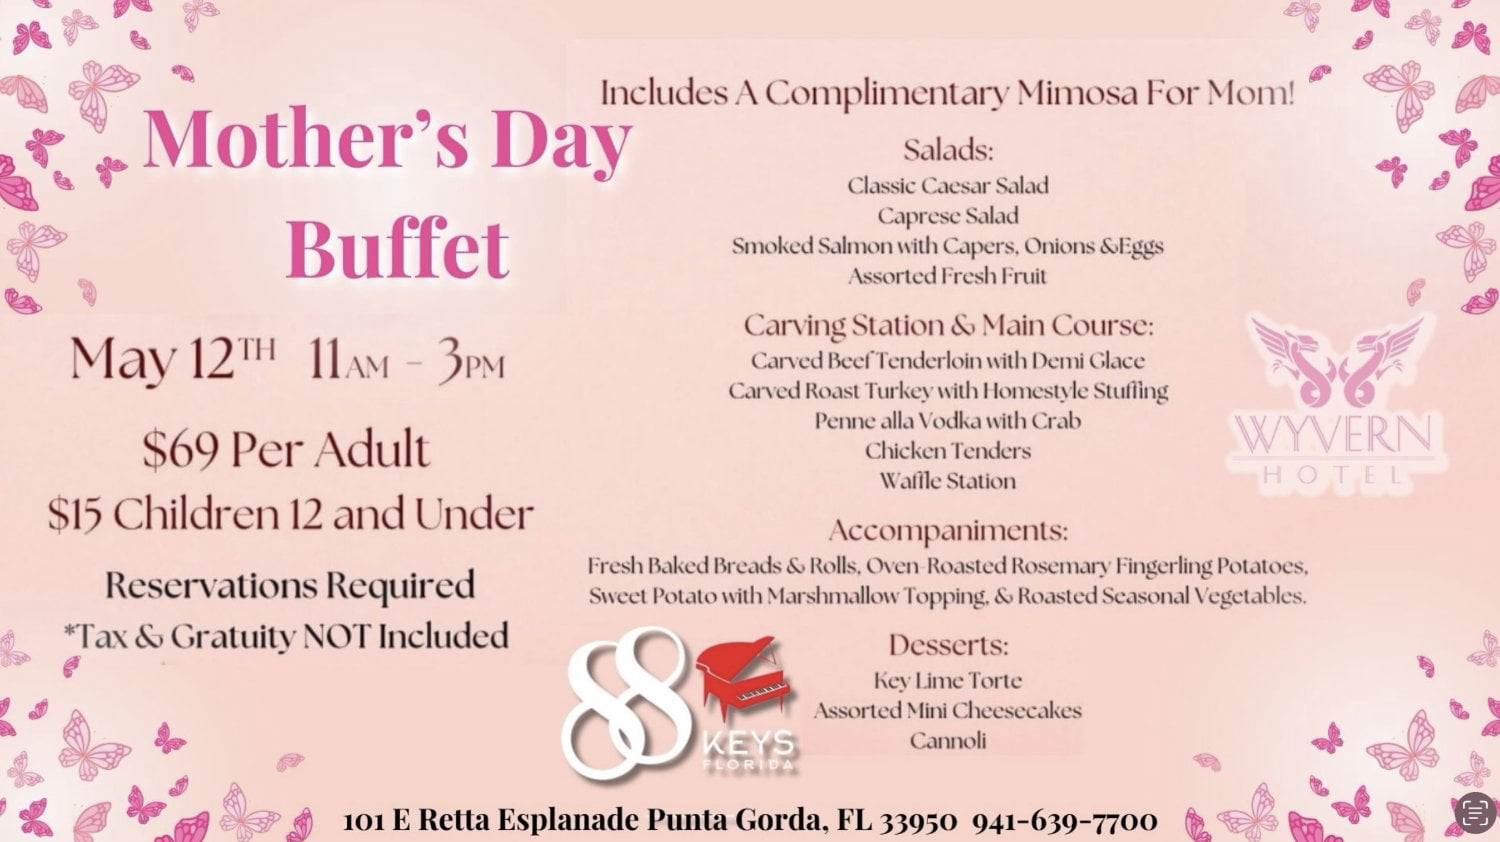 Mother's Day at 88 Keys